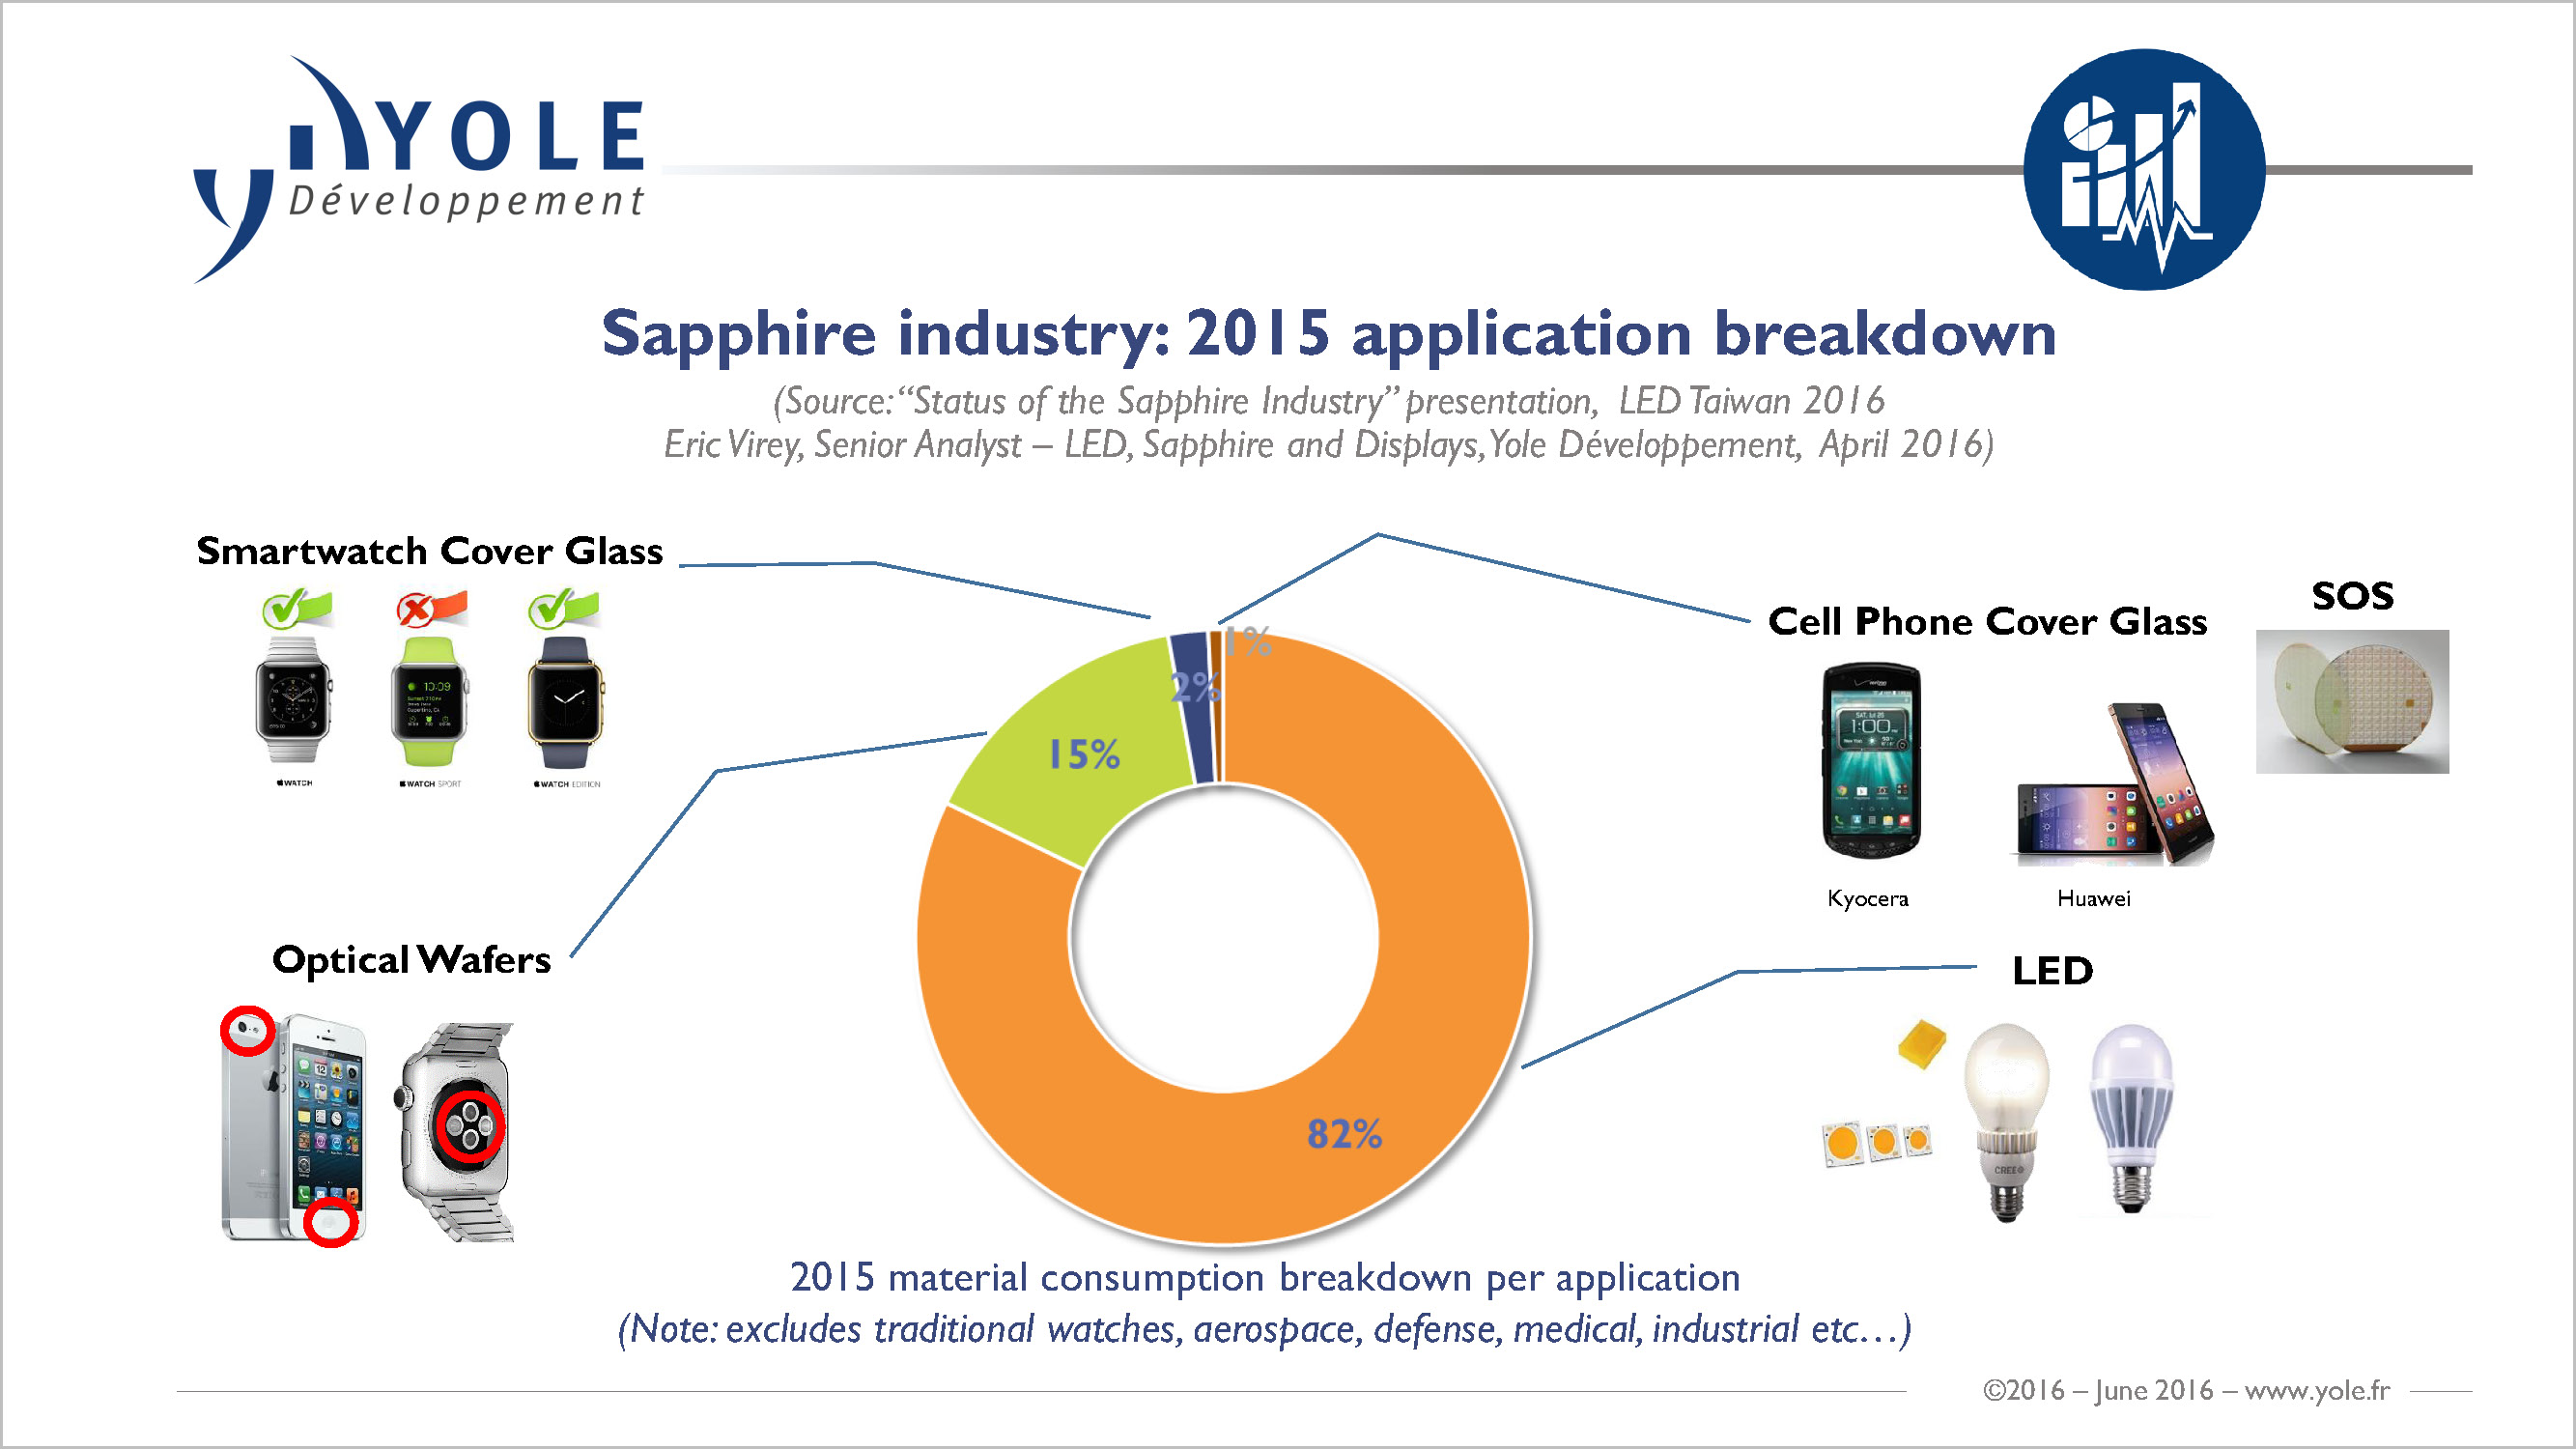 What’s next for the sapphire industry?